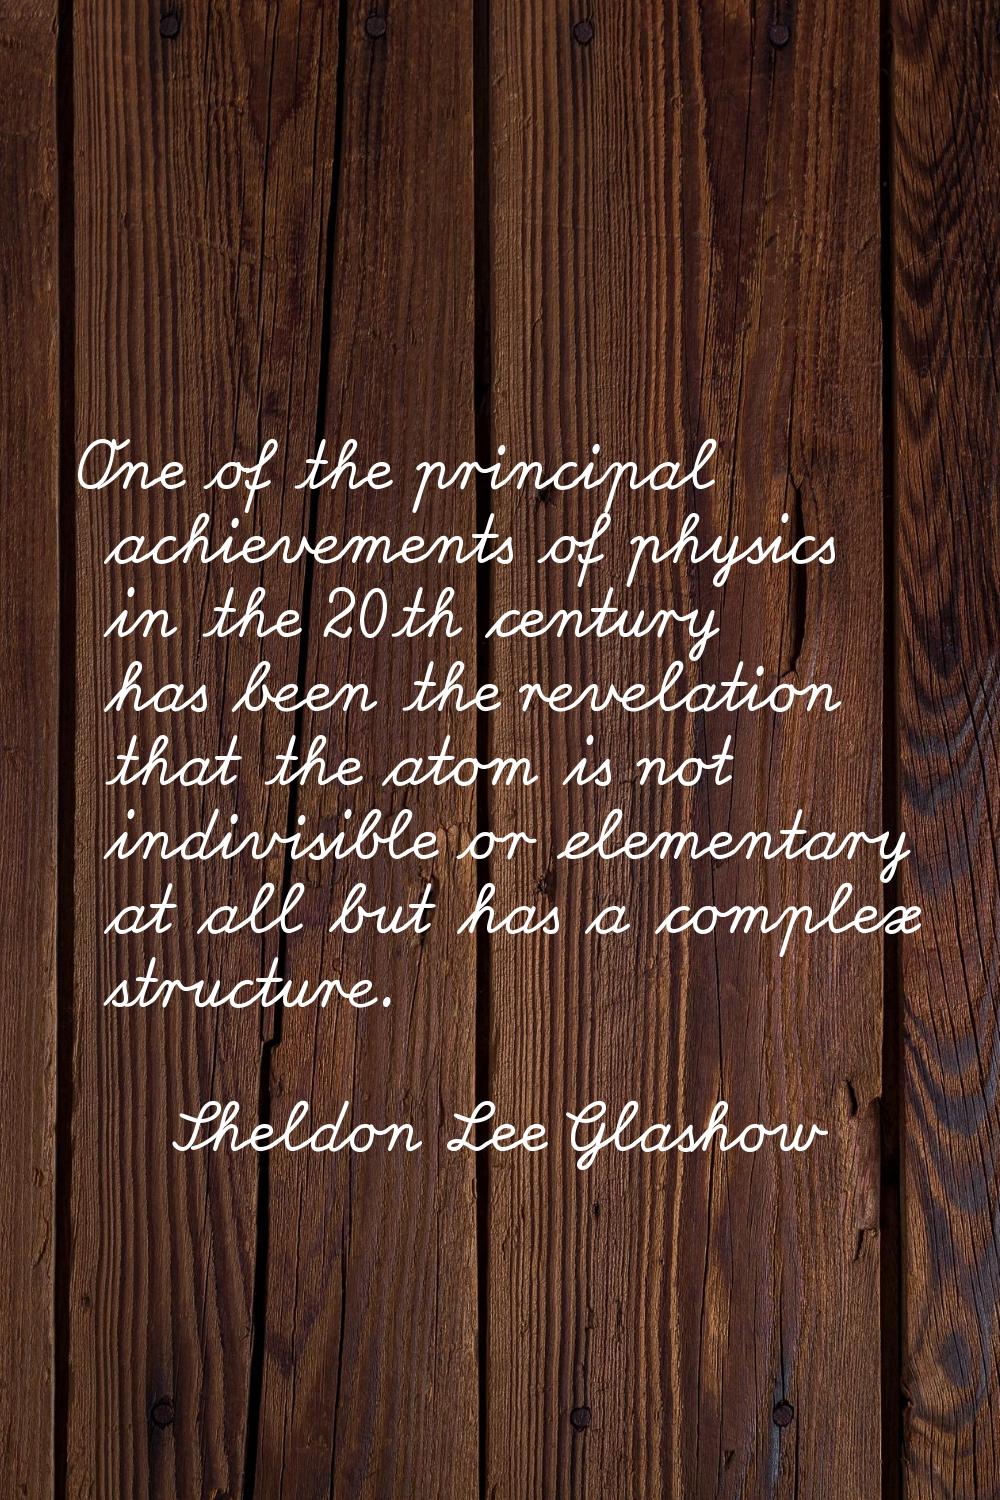 One of the principal achievements of physics in the 20th century has been the revelation that the a